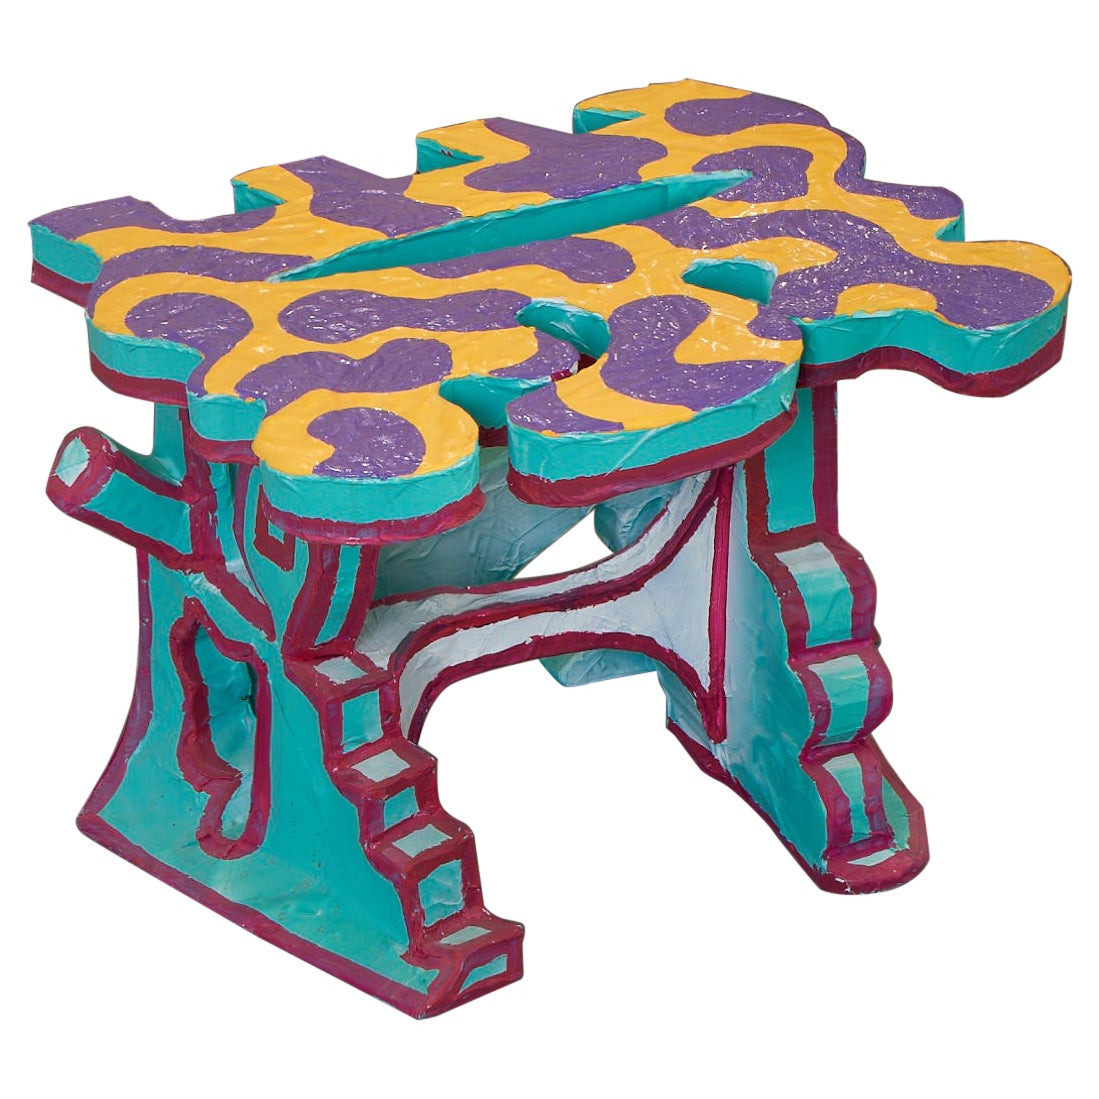 Psychedelic Coffee Table For Sale